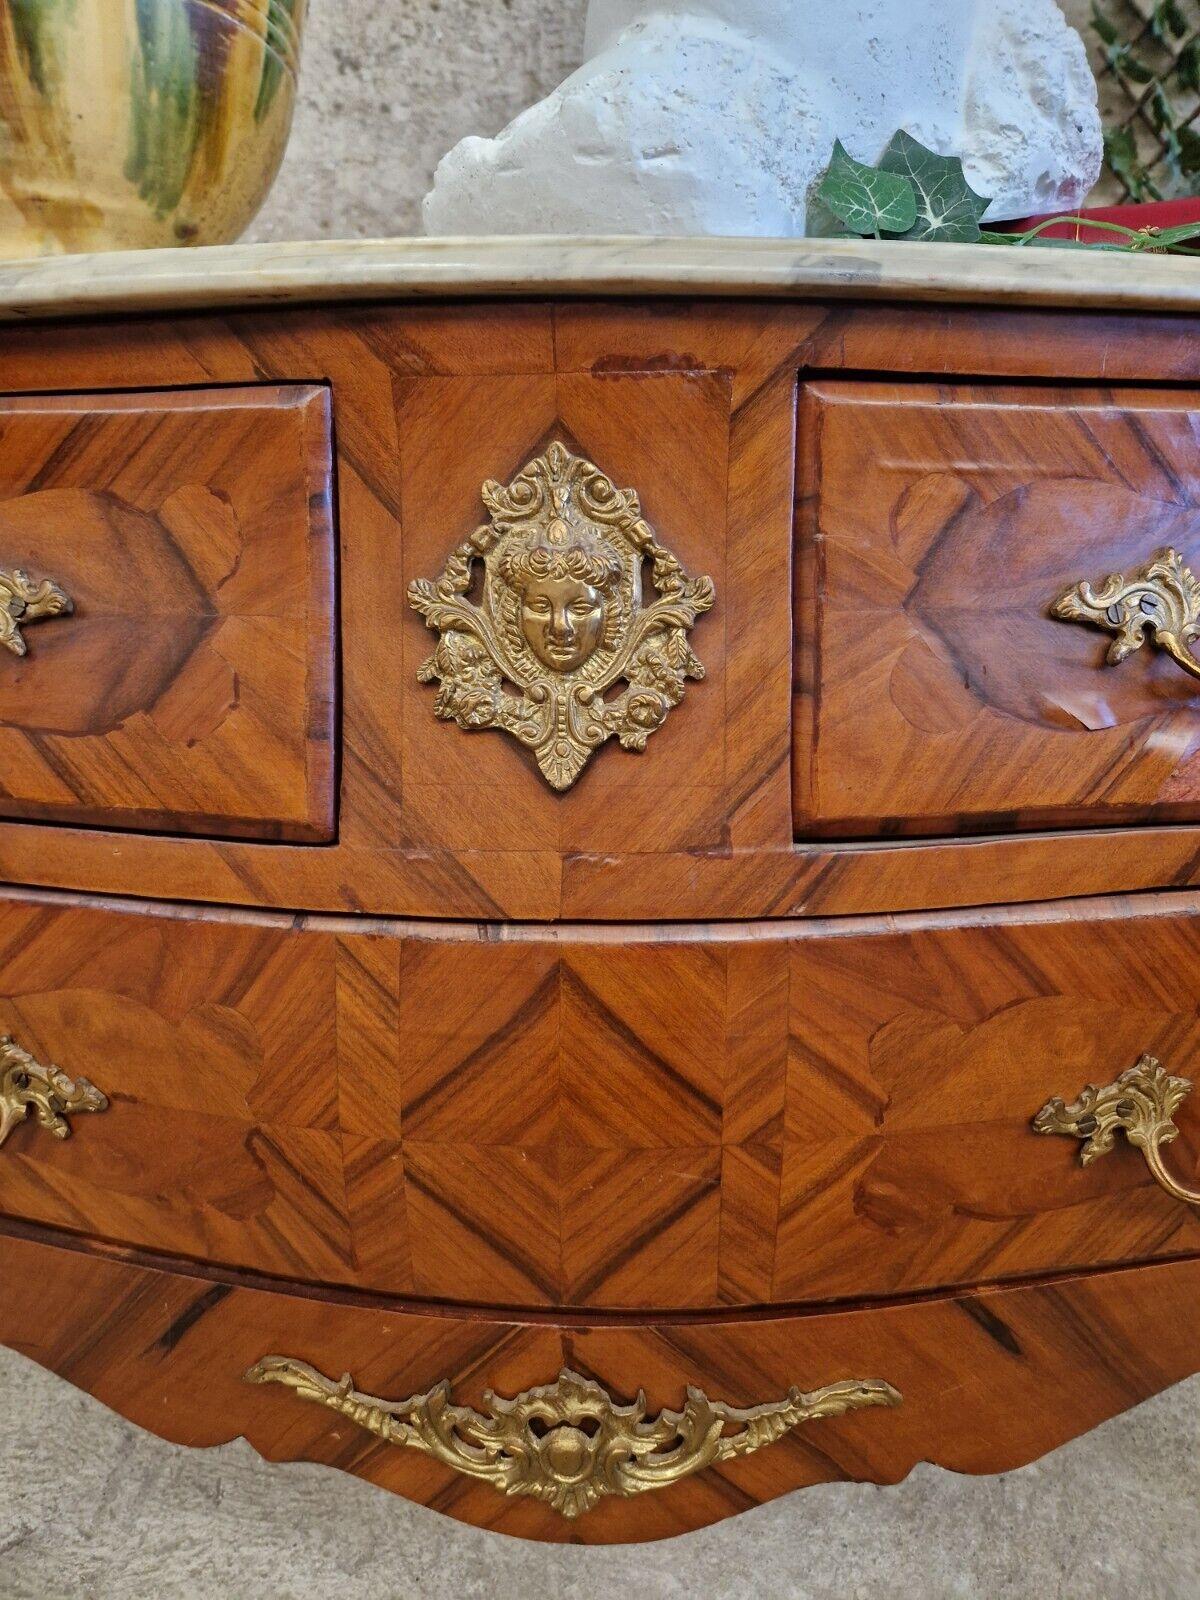 Fabulous Large Bombe Chest of Drawers 

French Baroque Style Bombe Chest of Drawers 

Antique allow for signs of age and use 

Shaped Marble Top  (Chip to corner)

Walnut Inlays (a few chips see images)

2 Drawers 

Gilt Bronze Decorative Work

20th